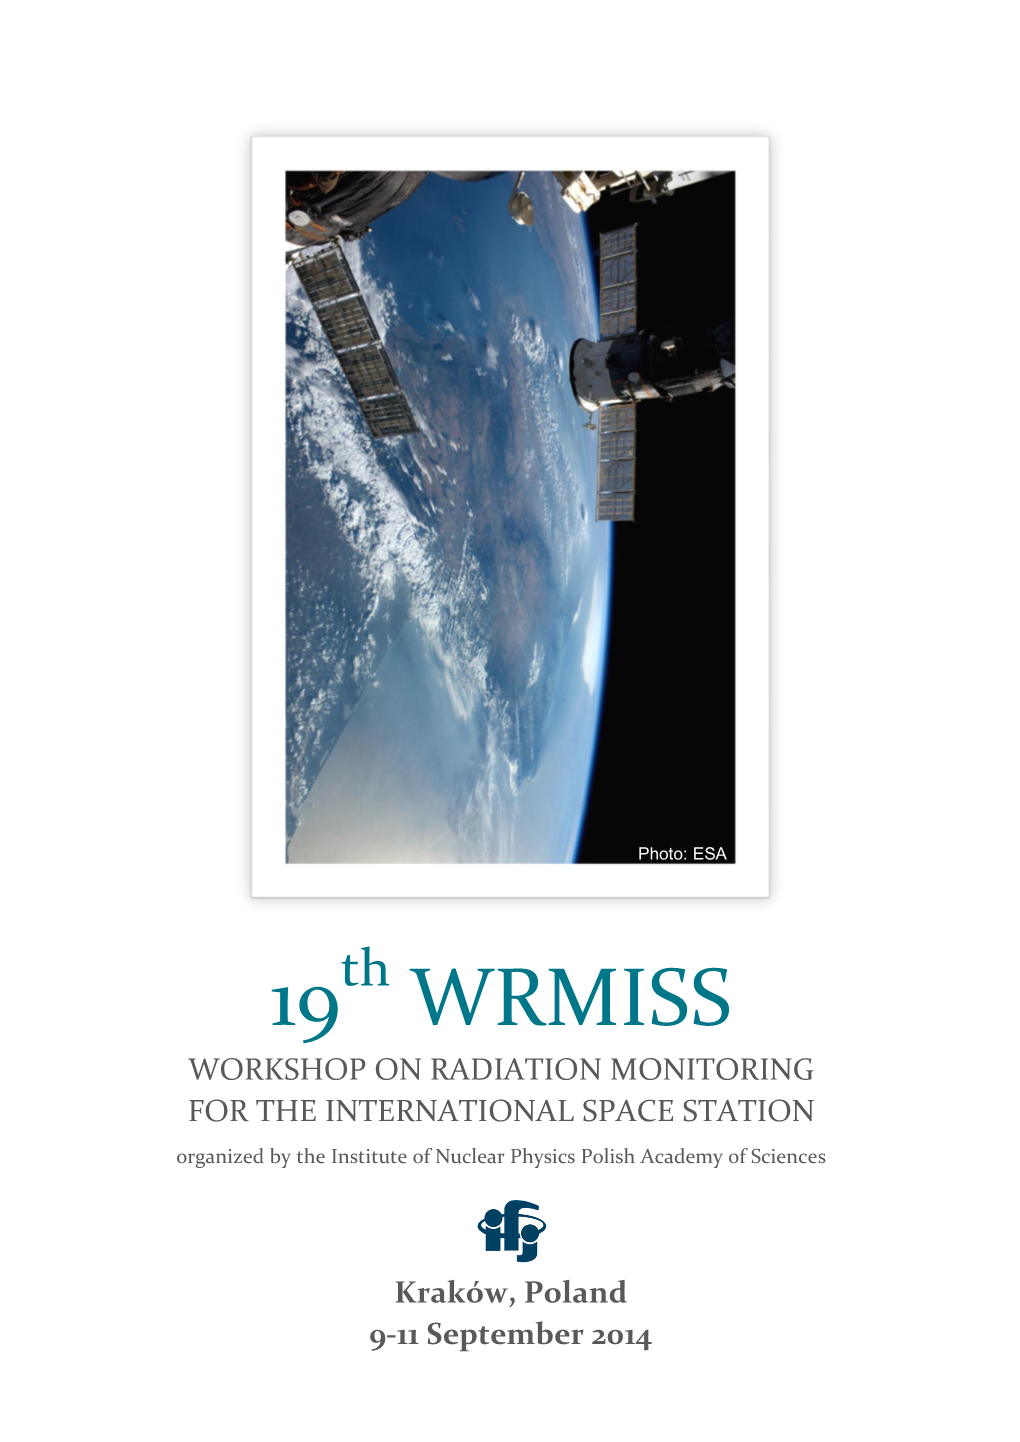 19Th WRMISS WORKSHOP on RADIATION MONITORING for the INTERNATIONAL SPACE STATION Organized by the Institute of Nuclear Physics Polish Academy of Sciences